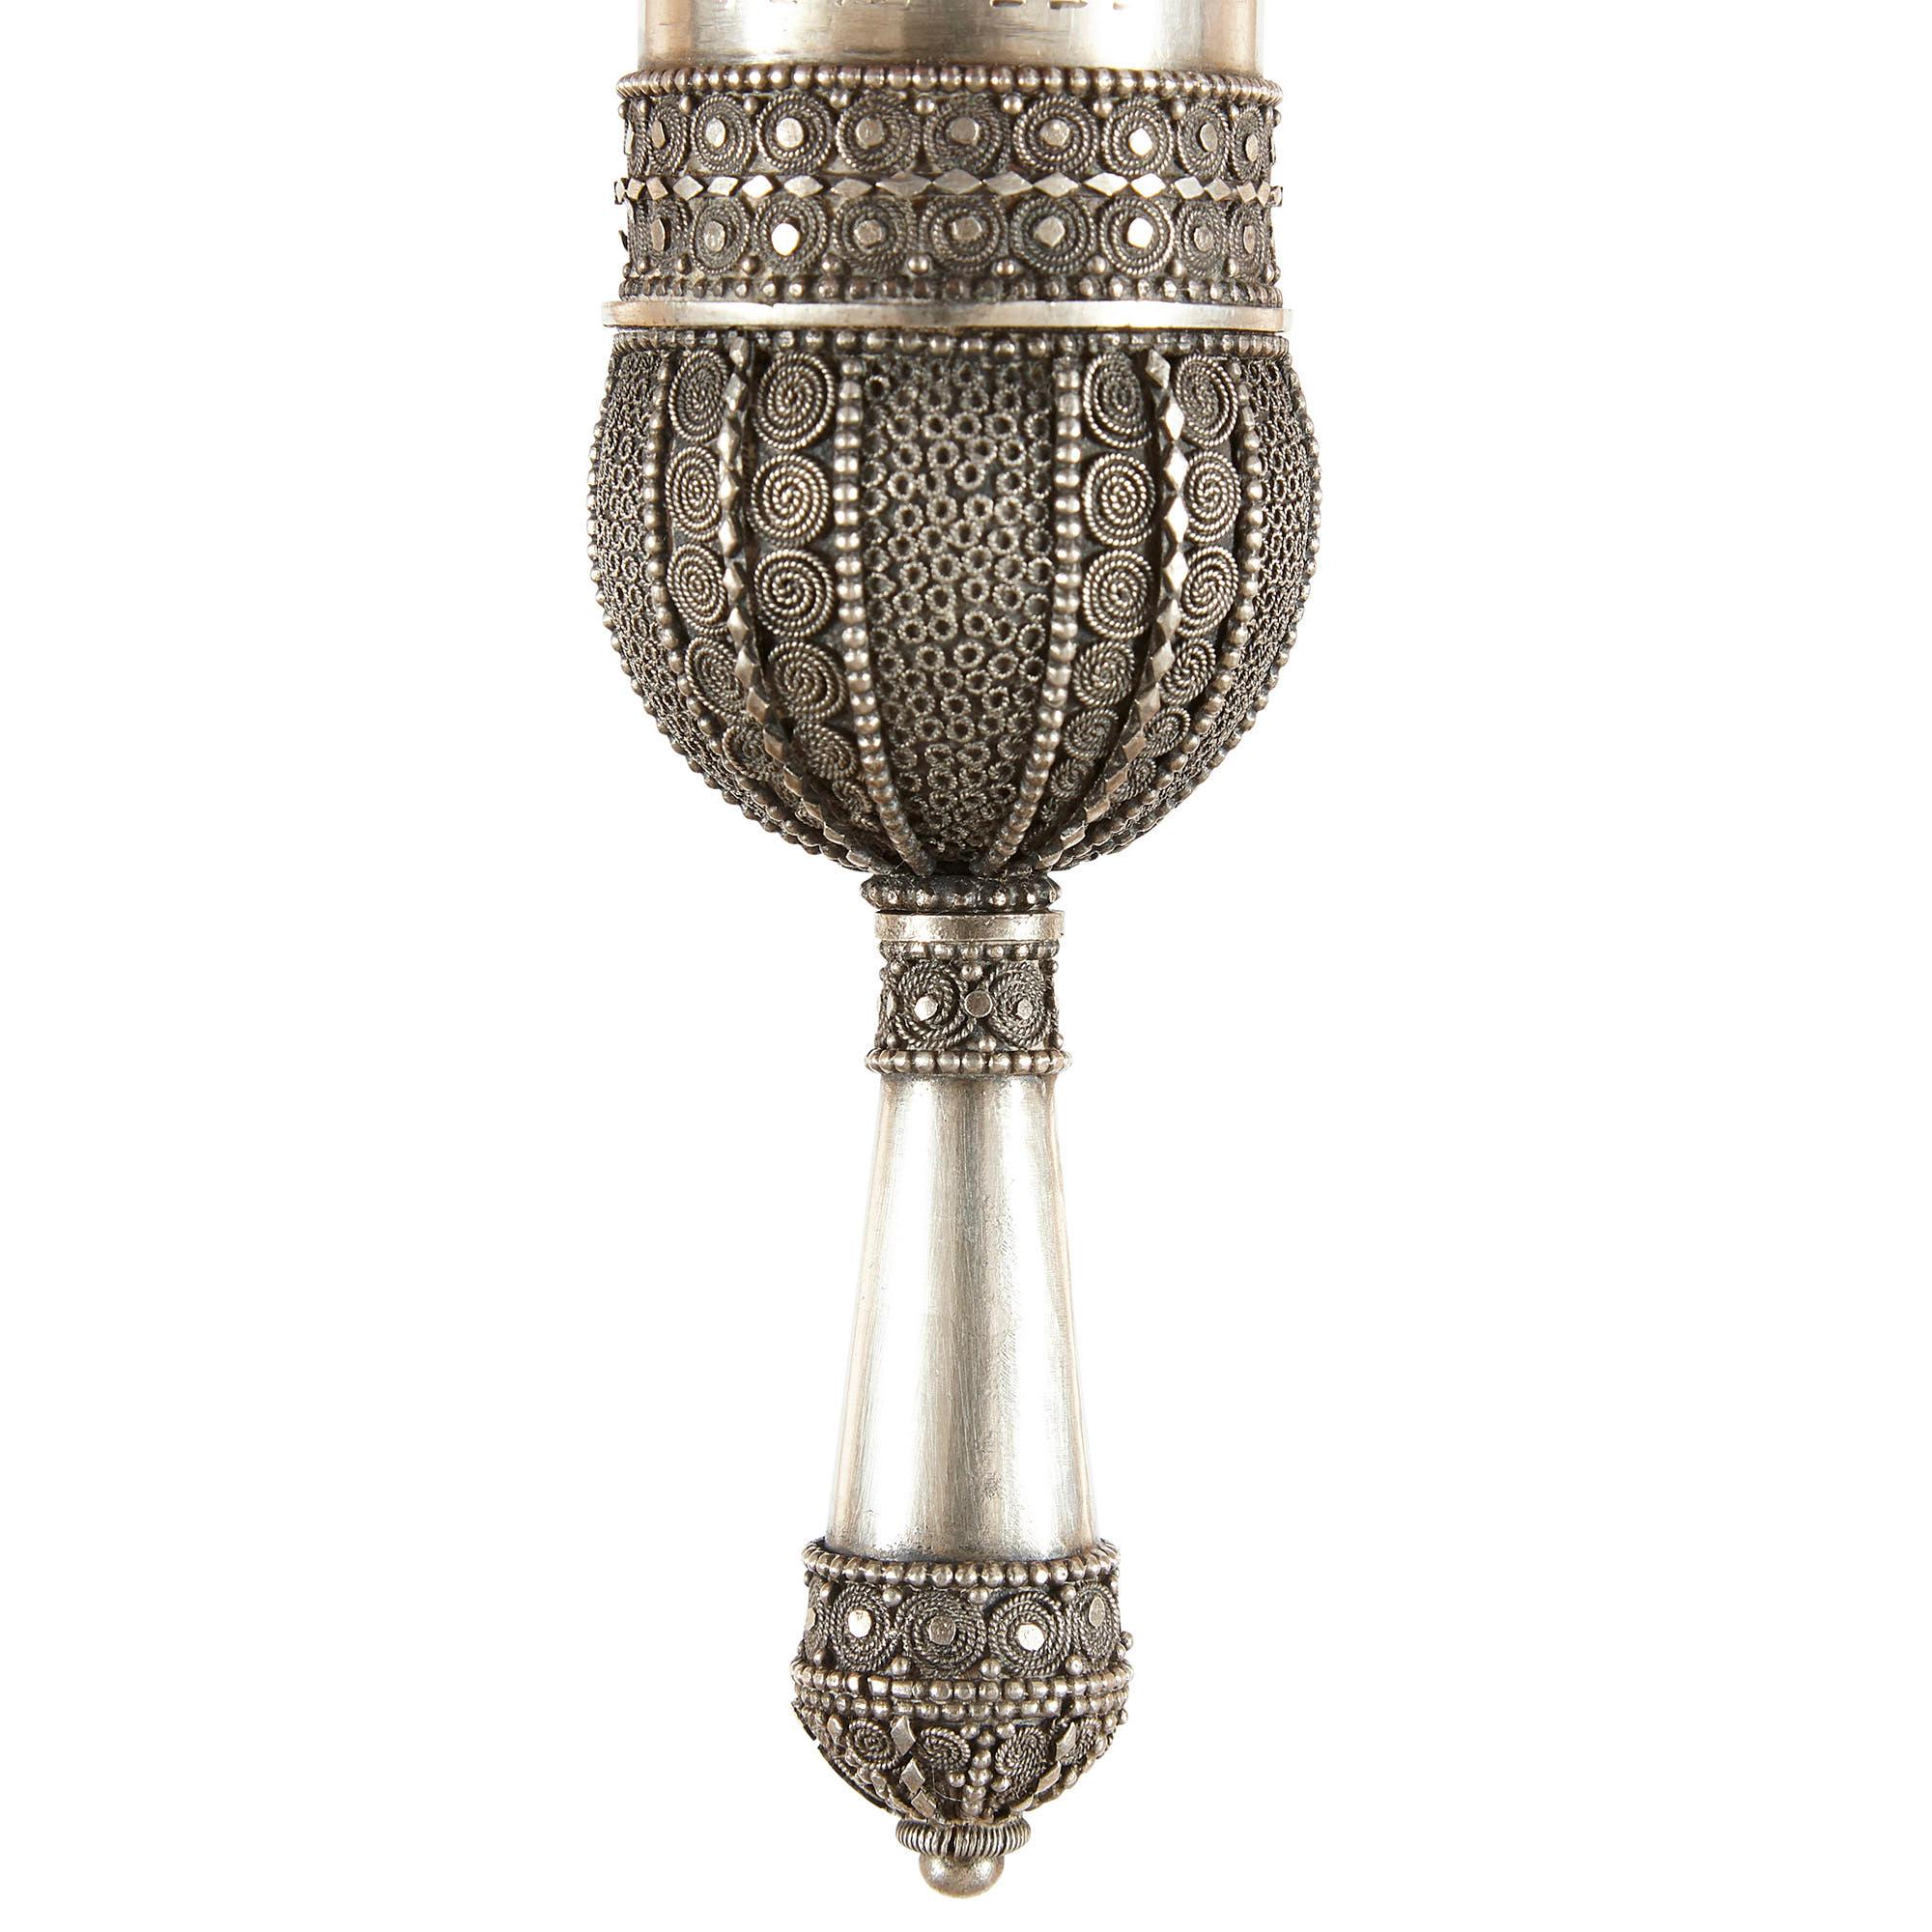 Silver Megillah with Filigree Work by Bezalel Academy In Good Condition For Sale In London, GB